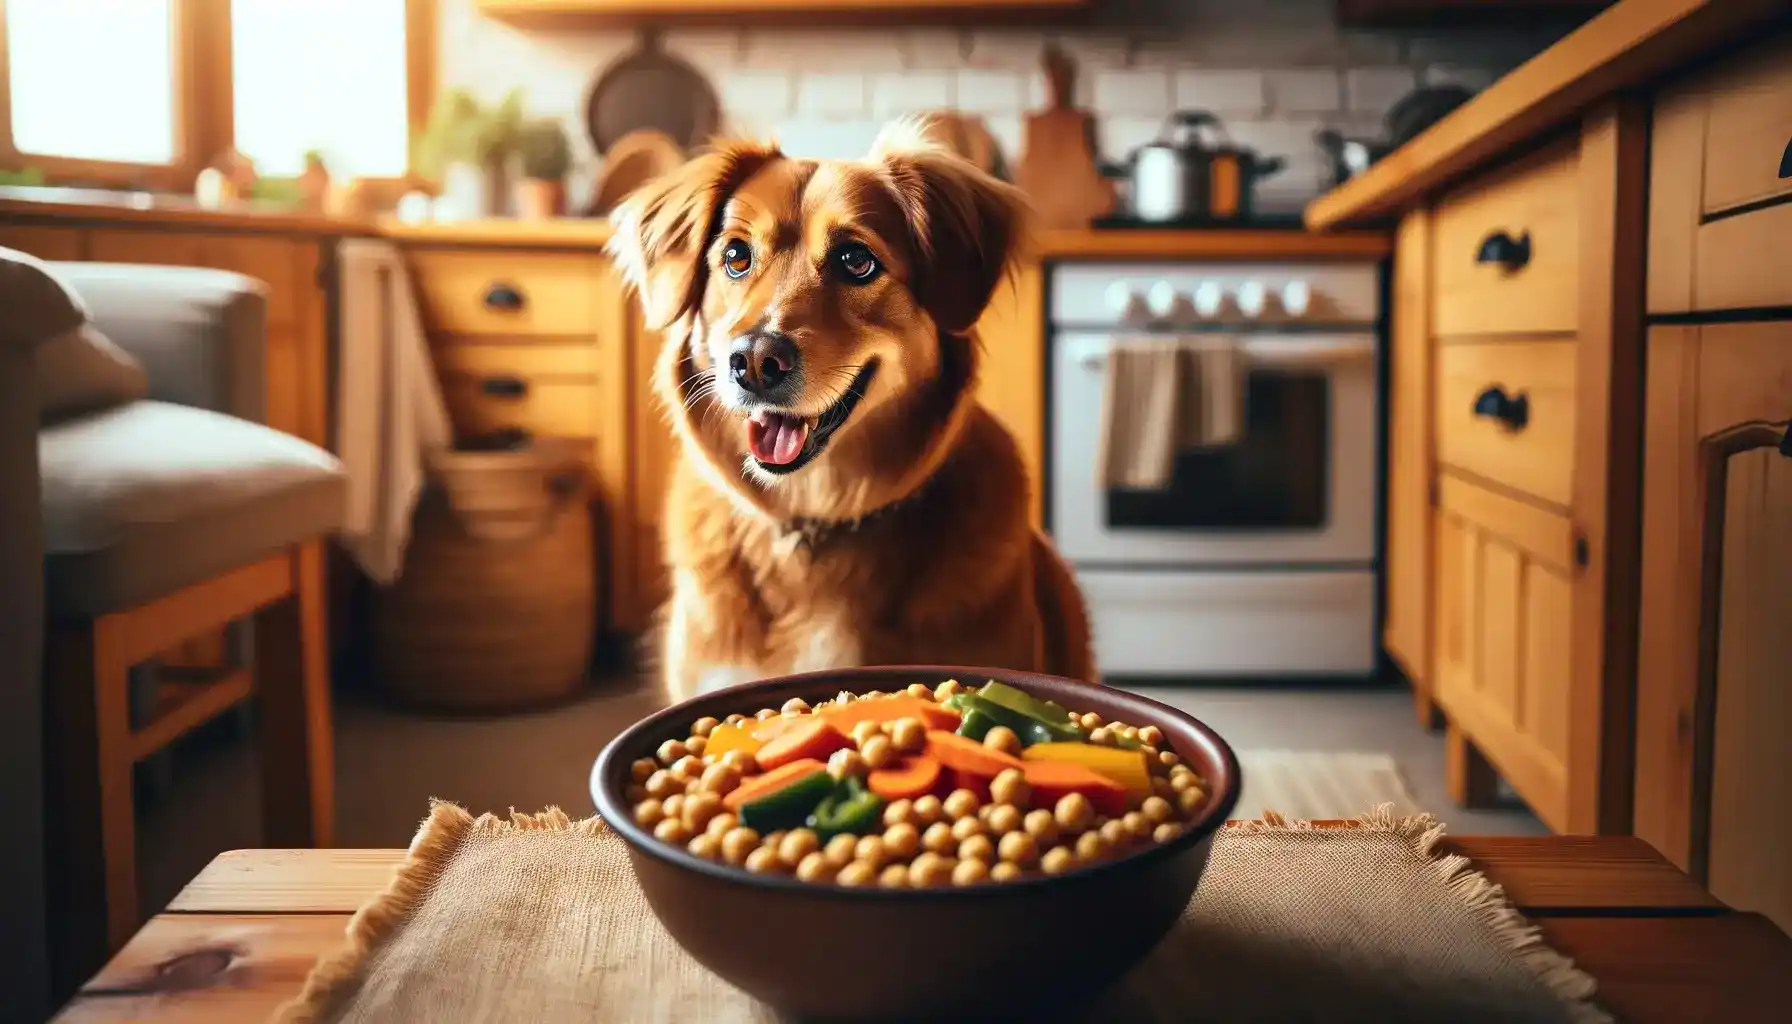 A vegetarian twist: Homemade dog food recipes your pooch will love